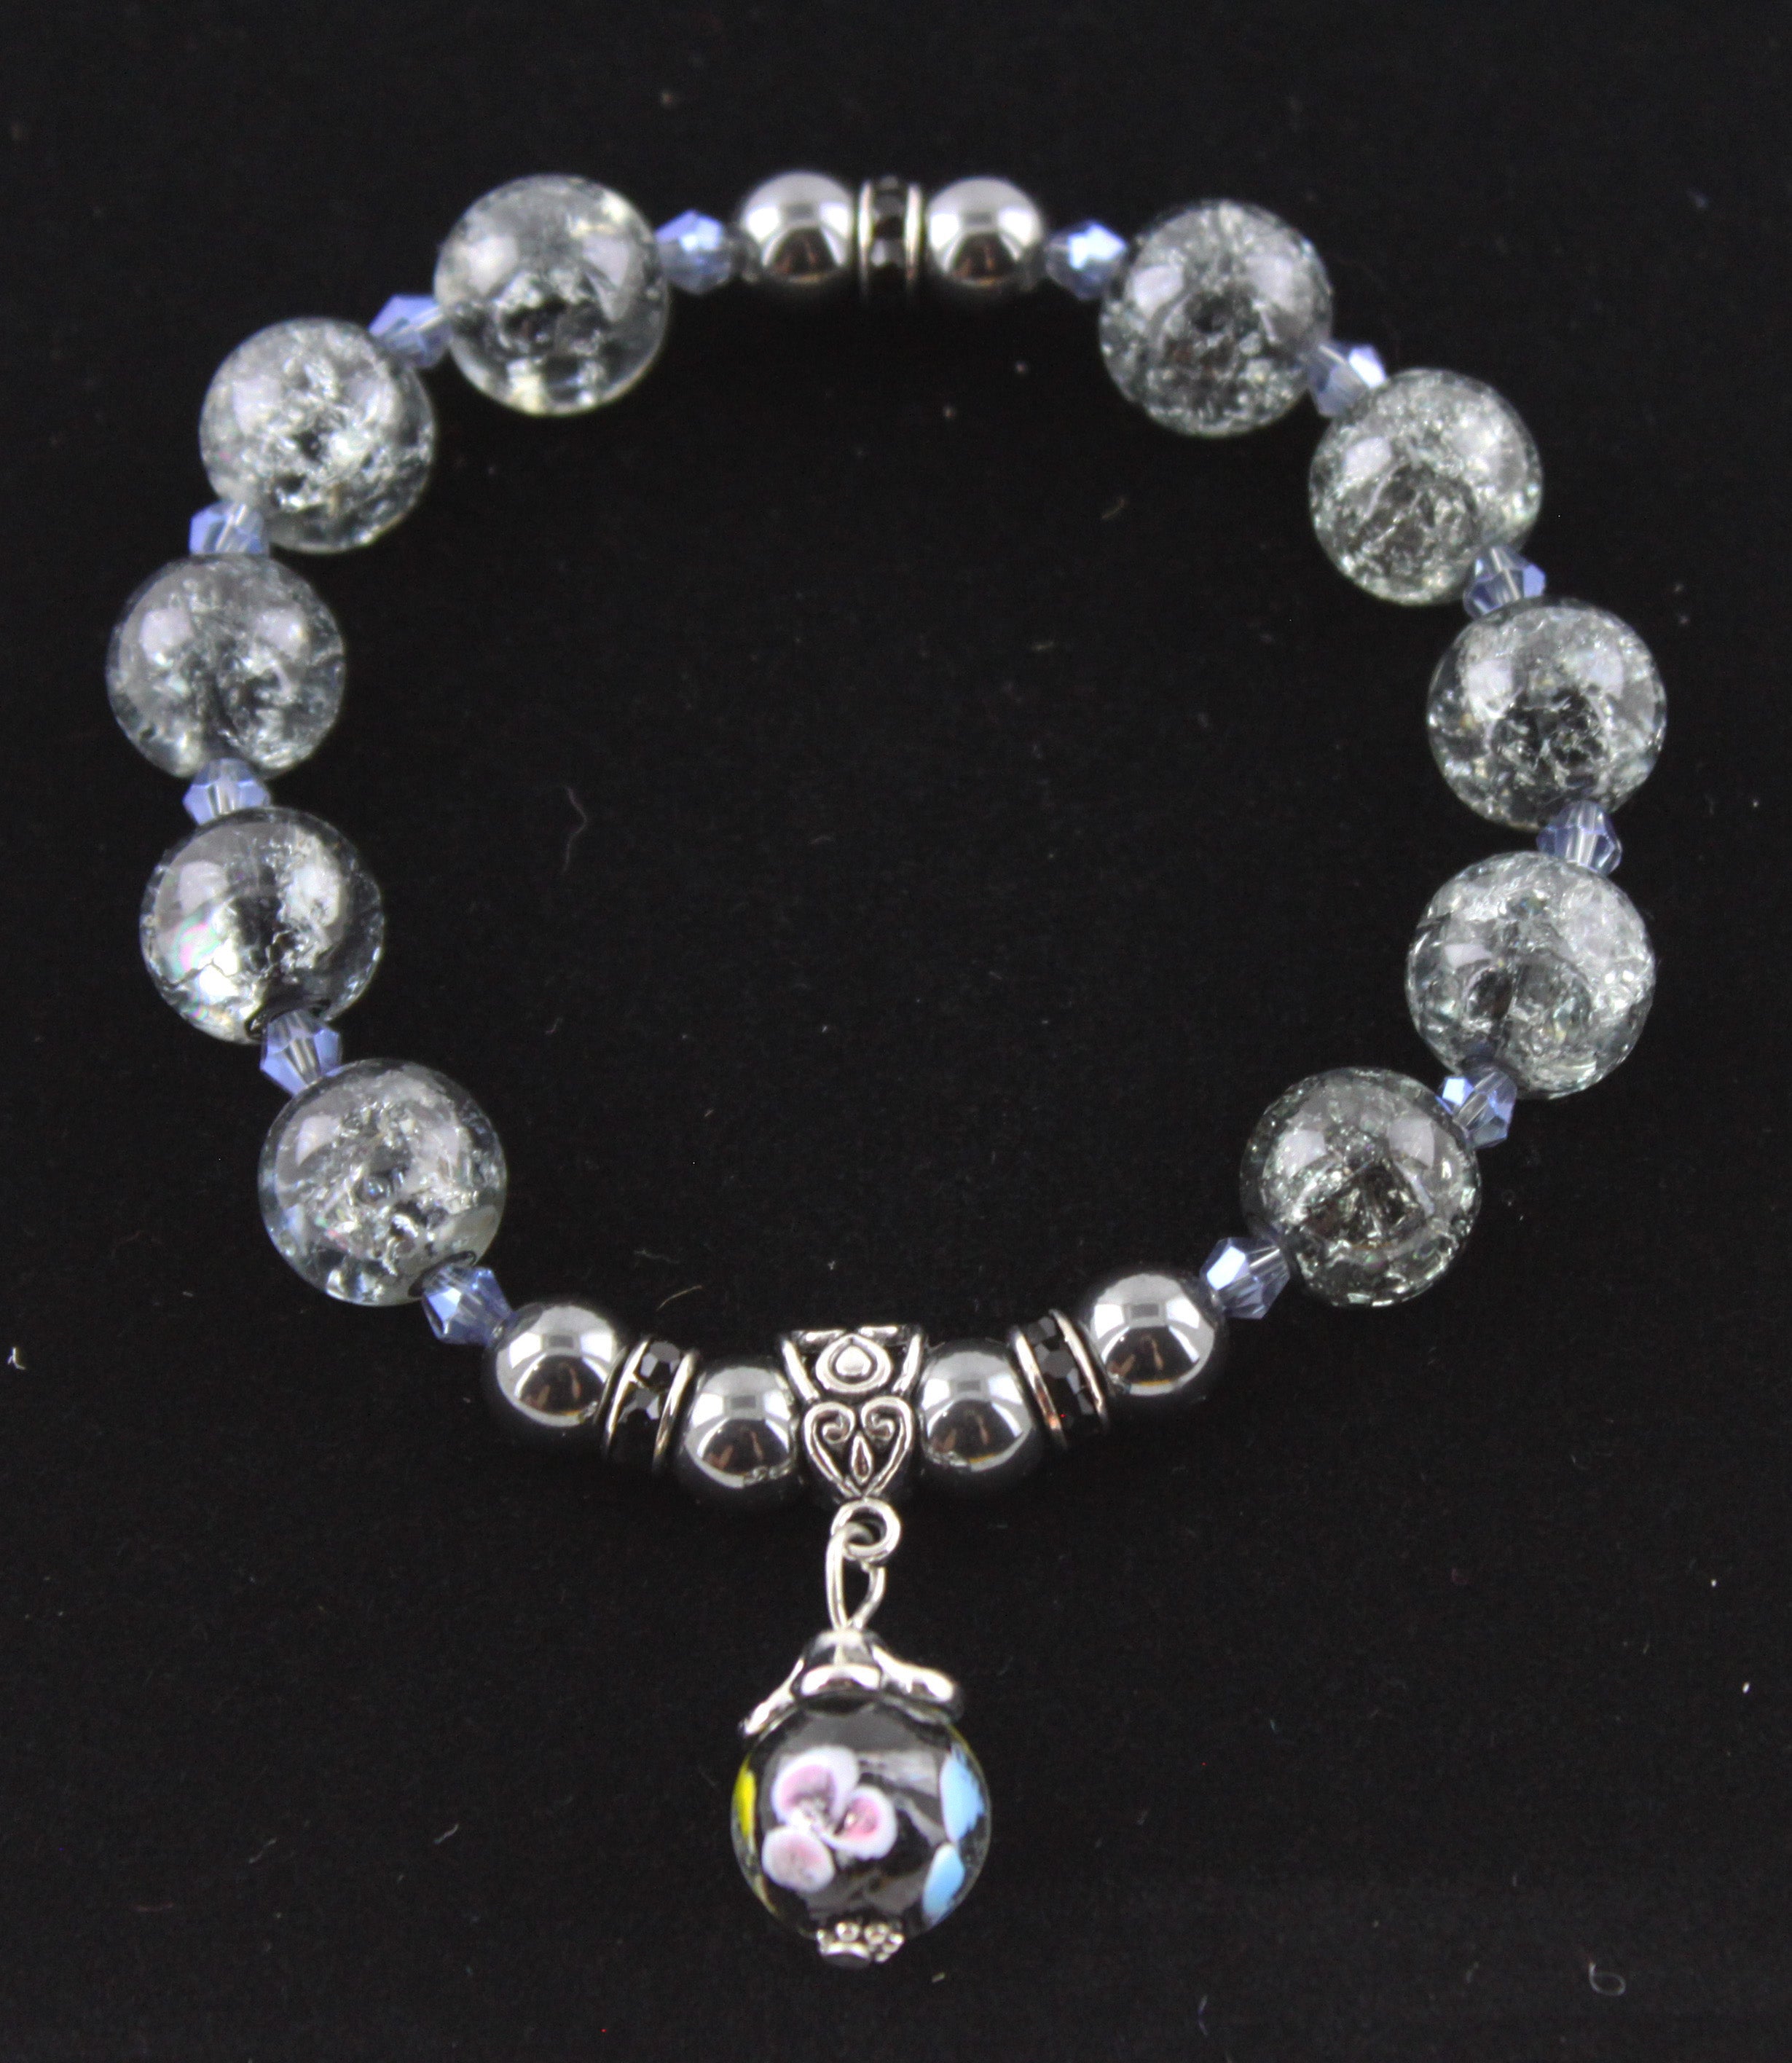 Grey Cracked Glass with a Hint of Blue Pendant Bracelet